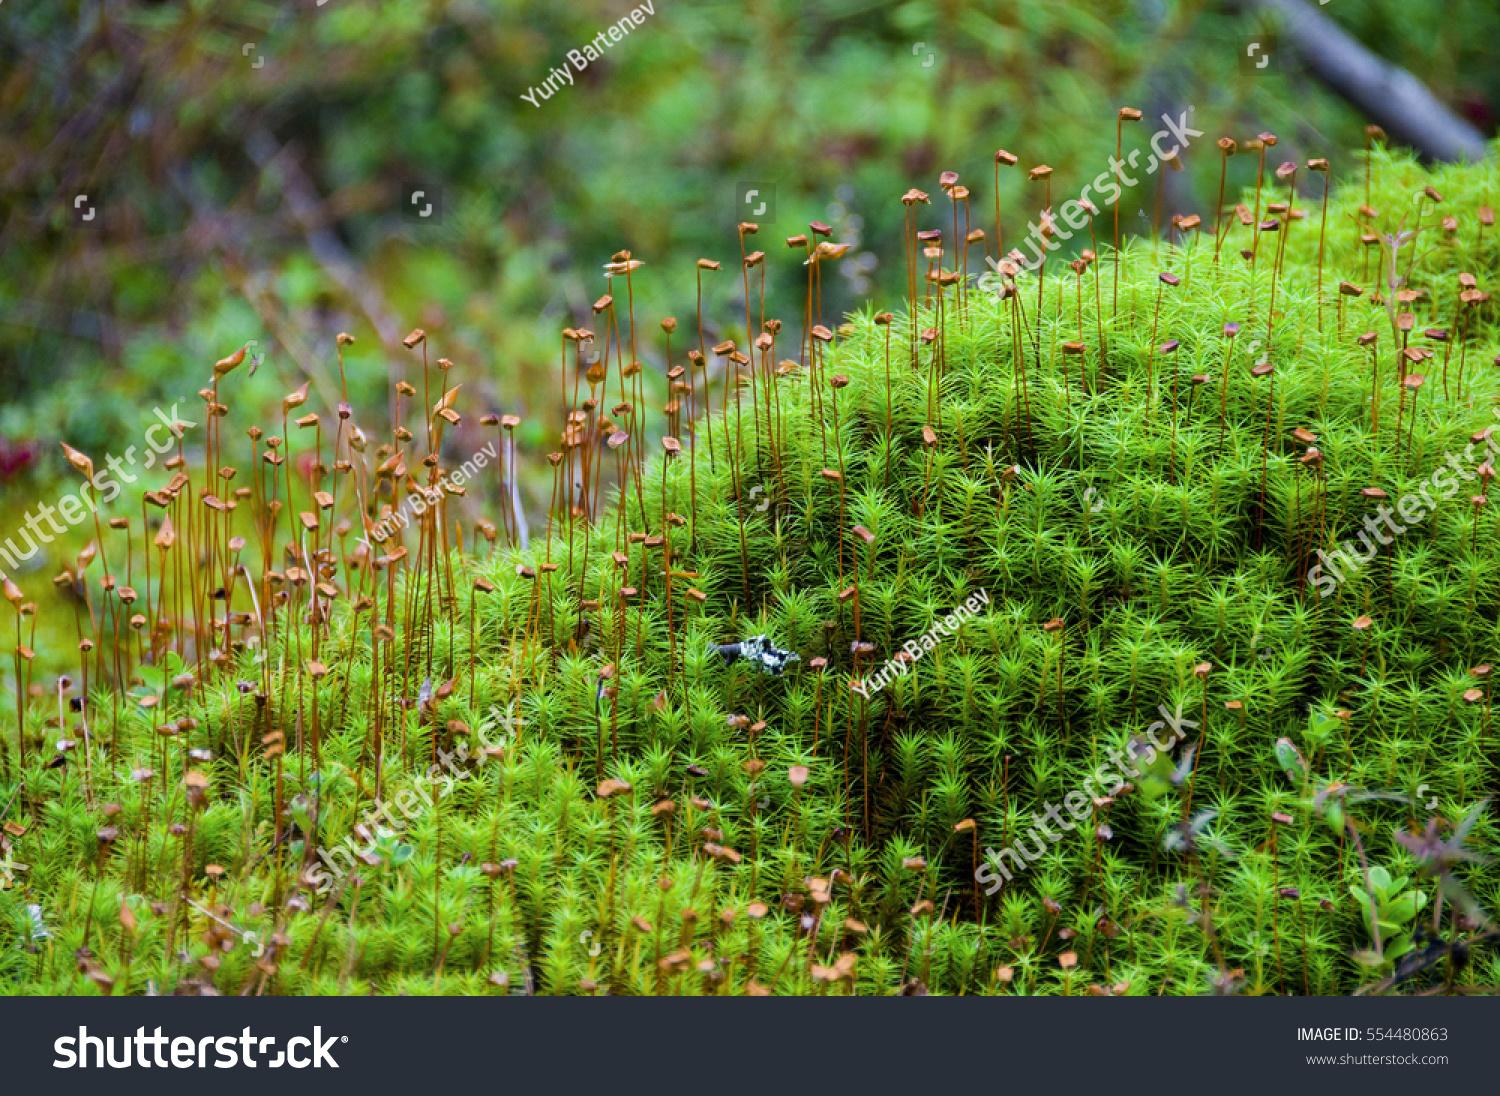 stock-photo-sporophytes-of-polytrichum-moss-polytrichum-commune-close-up-shallow-depth-of-field-suitable-554480863.jpg